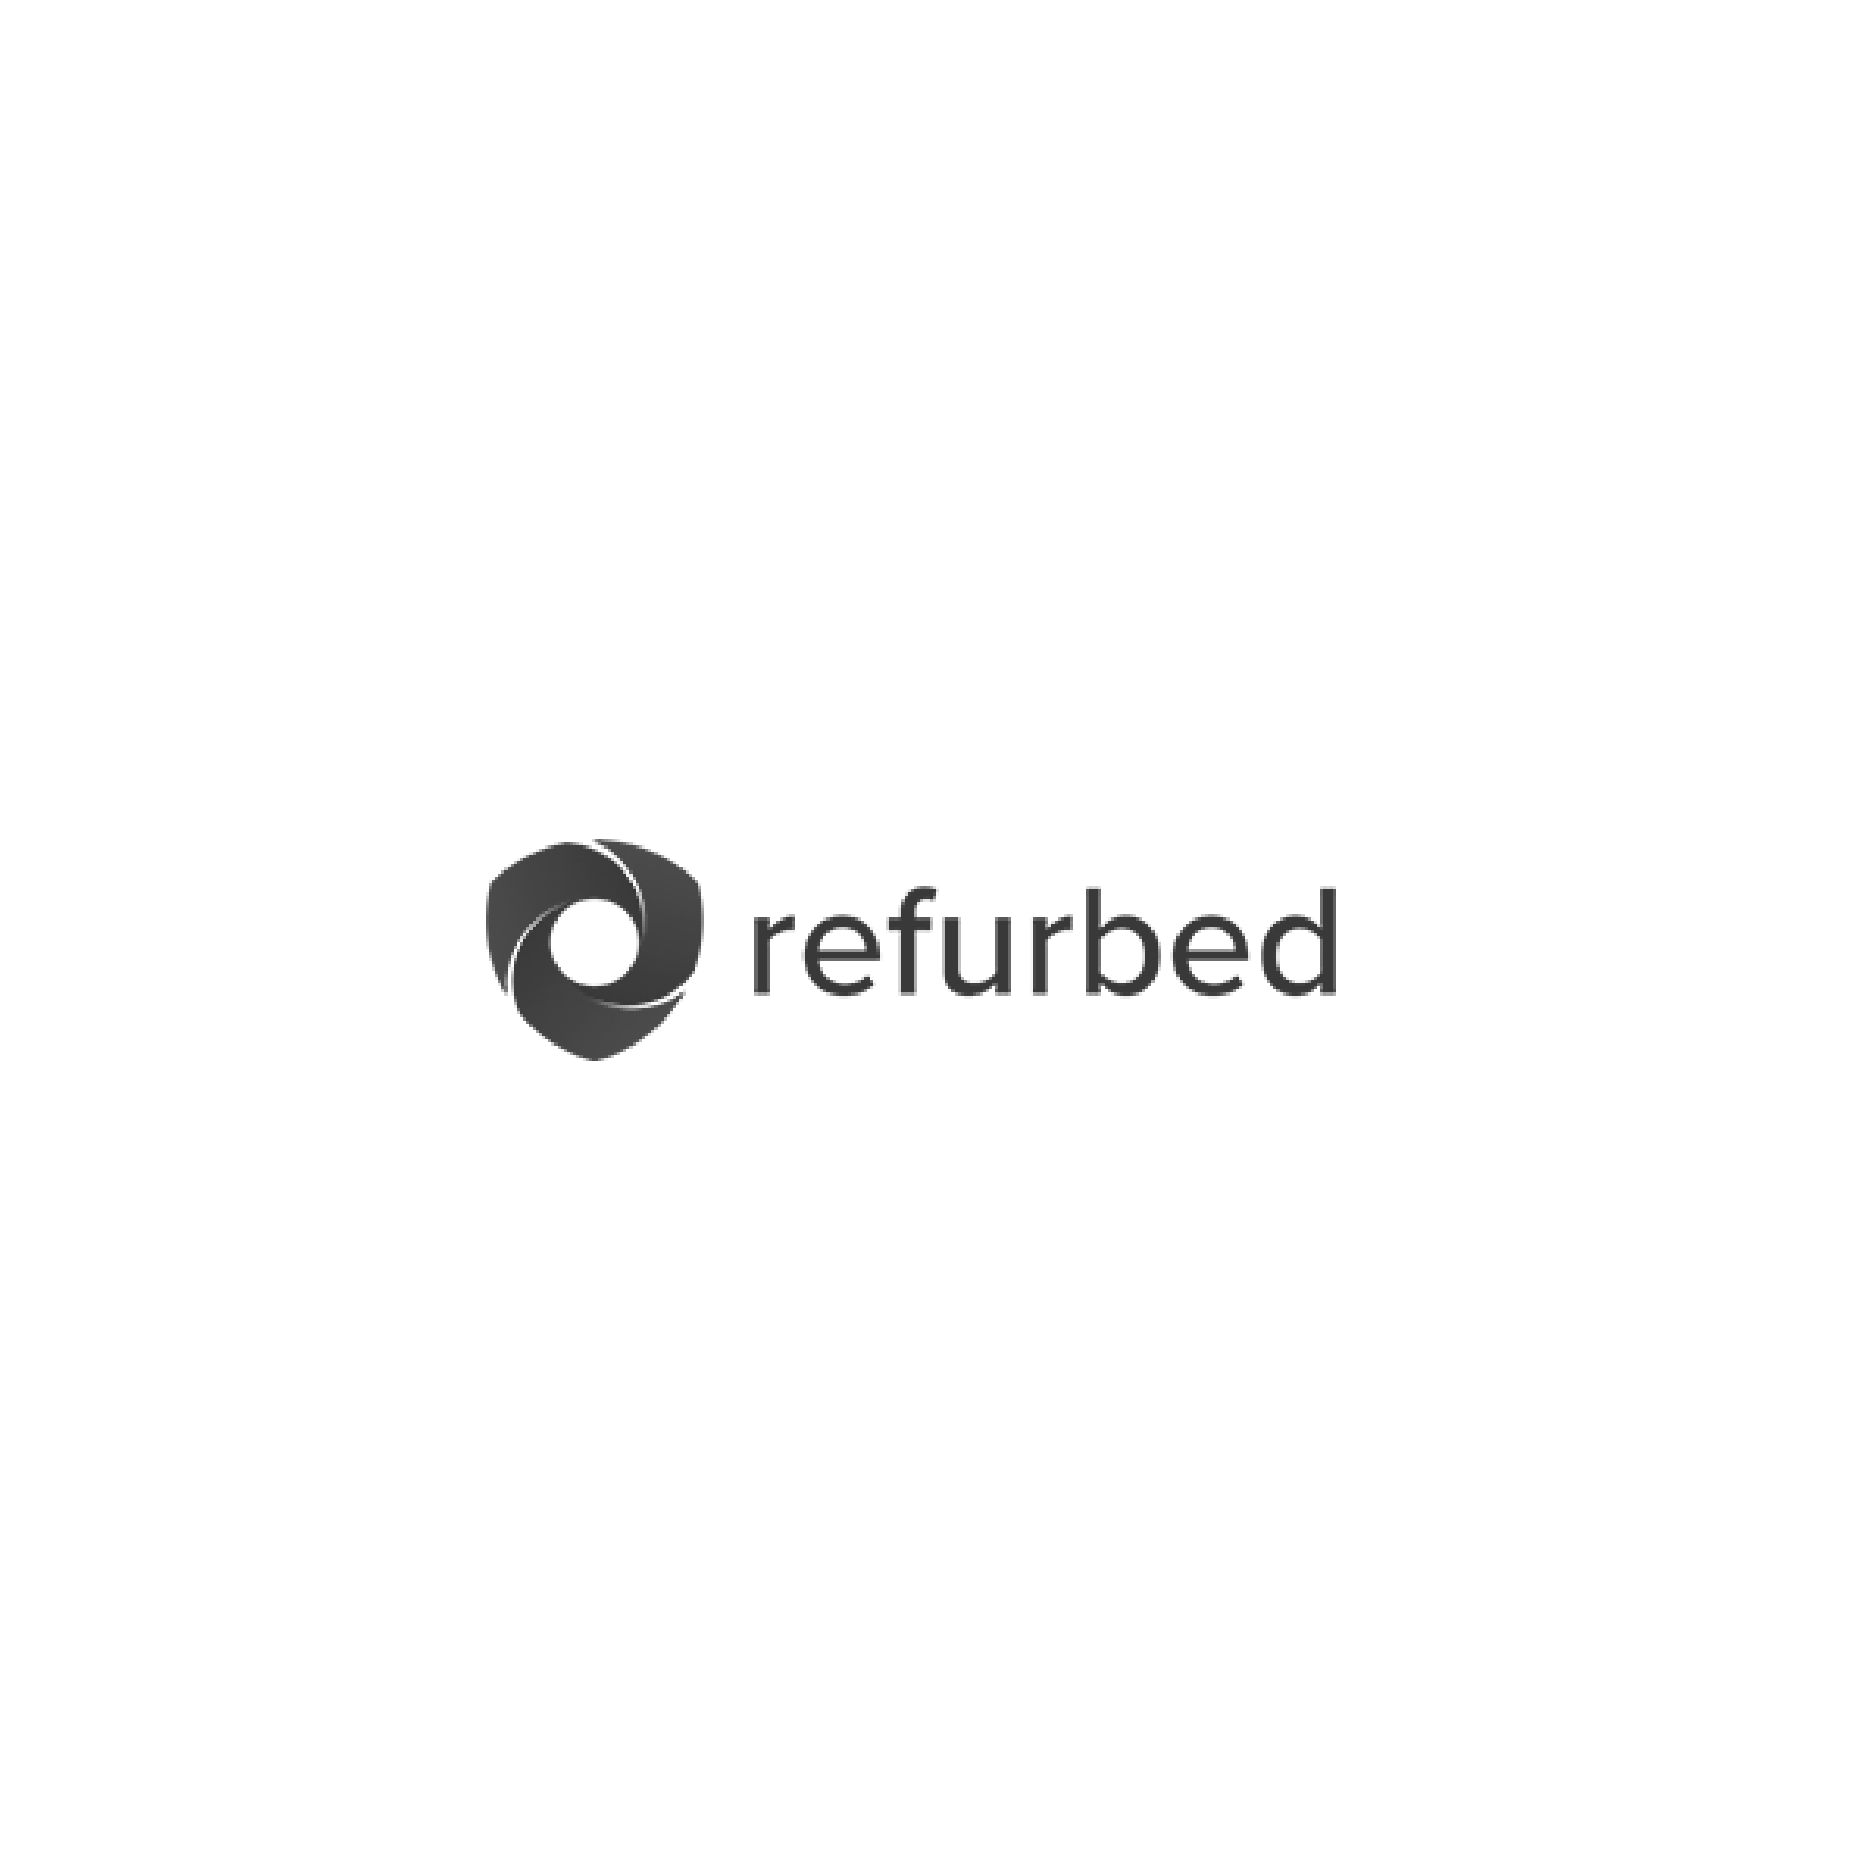 refurbed-01.png